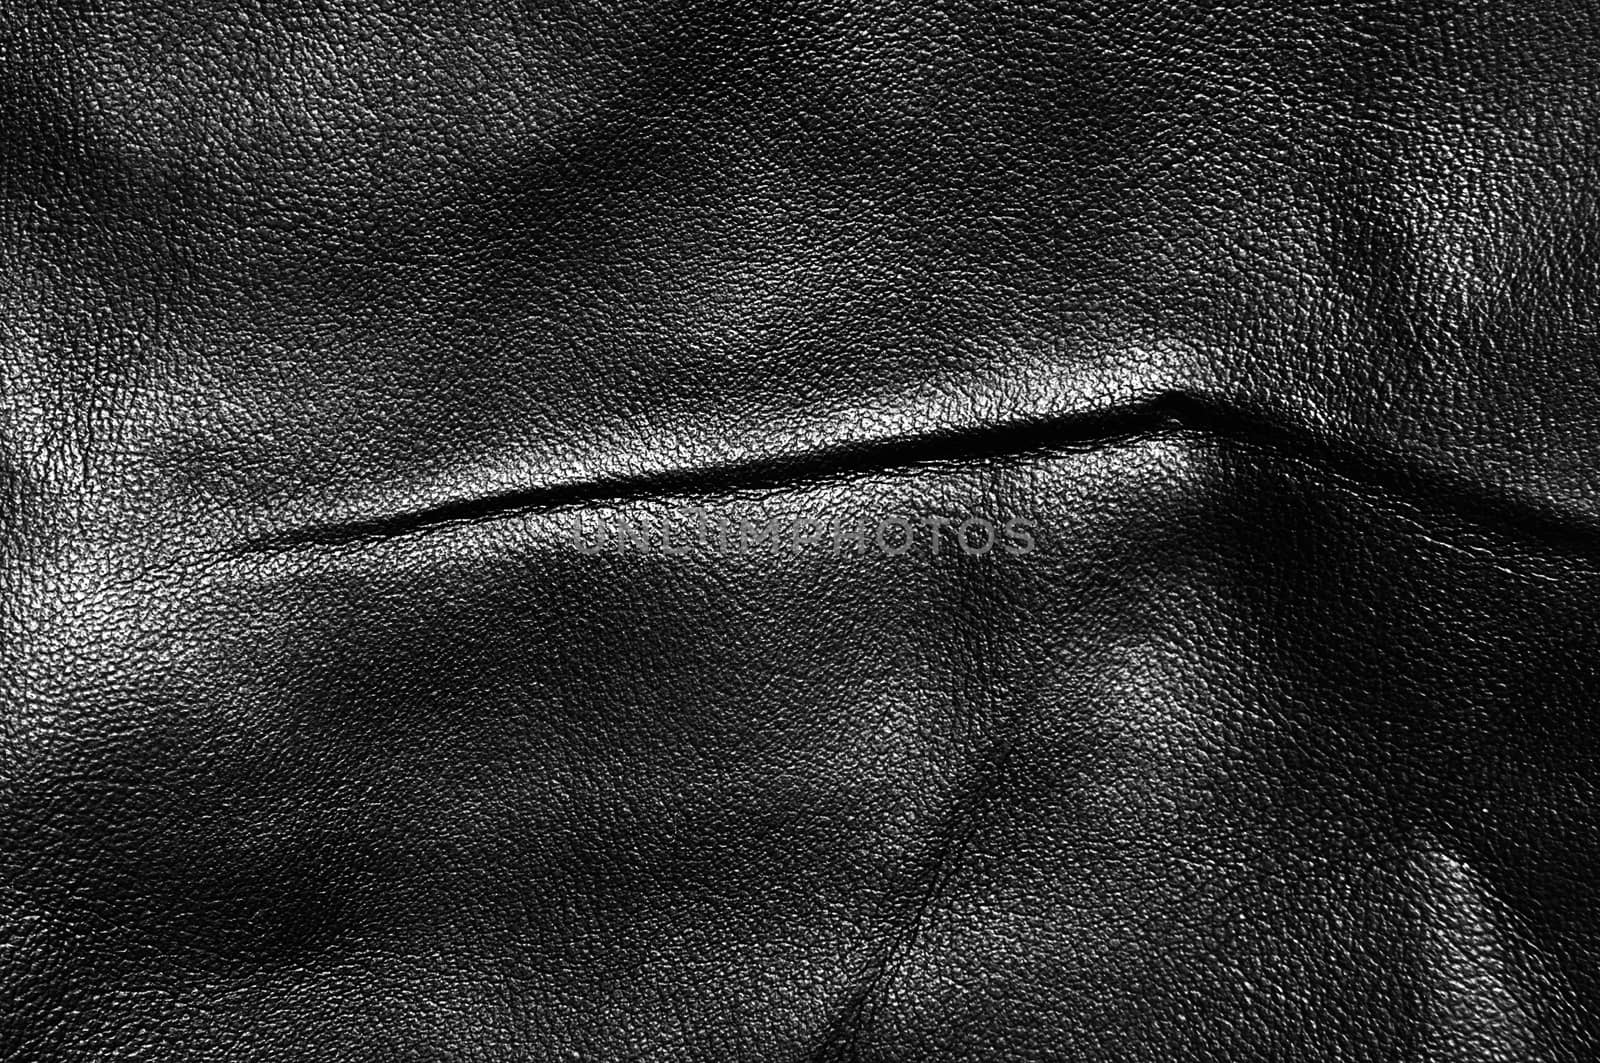  black leather texture by ivosar